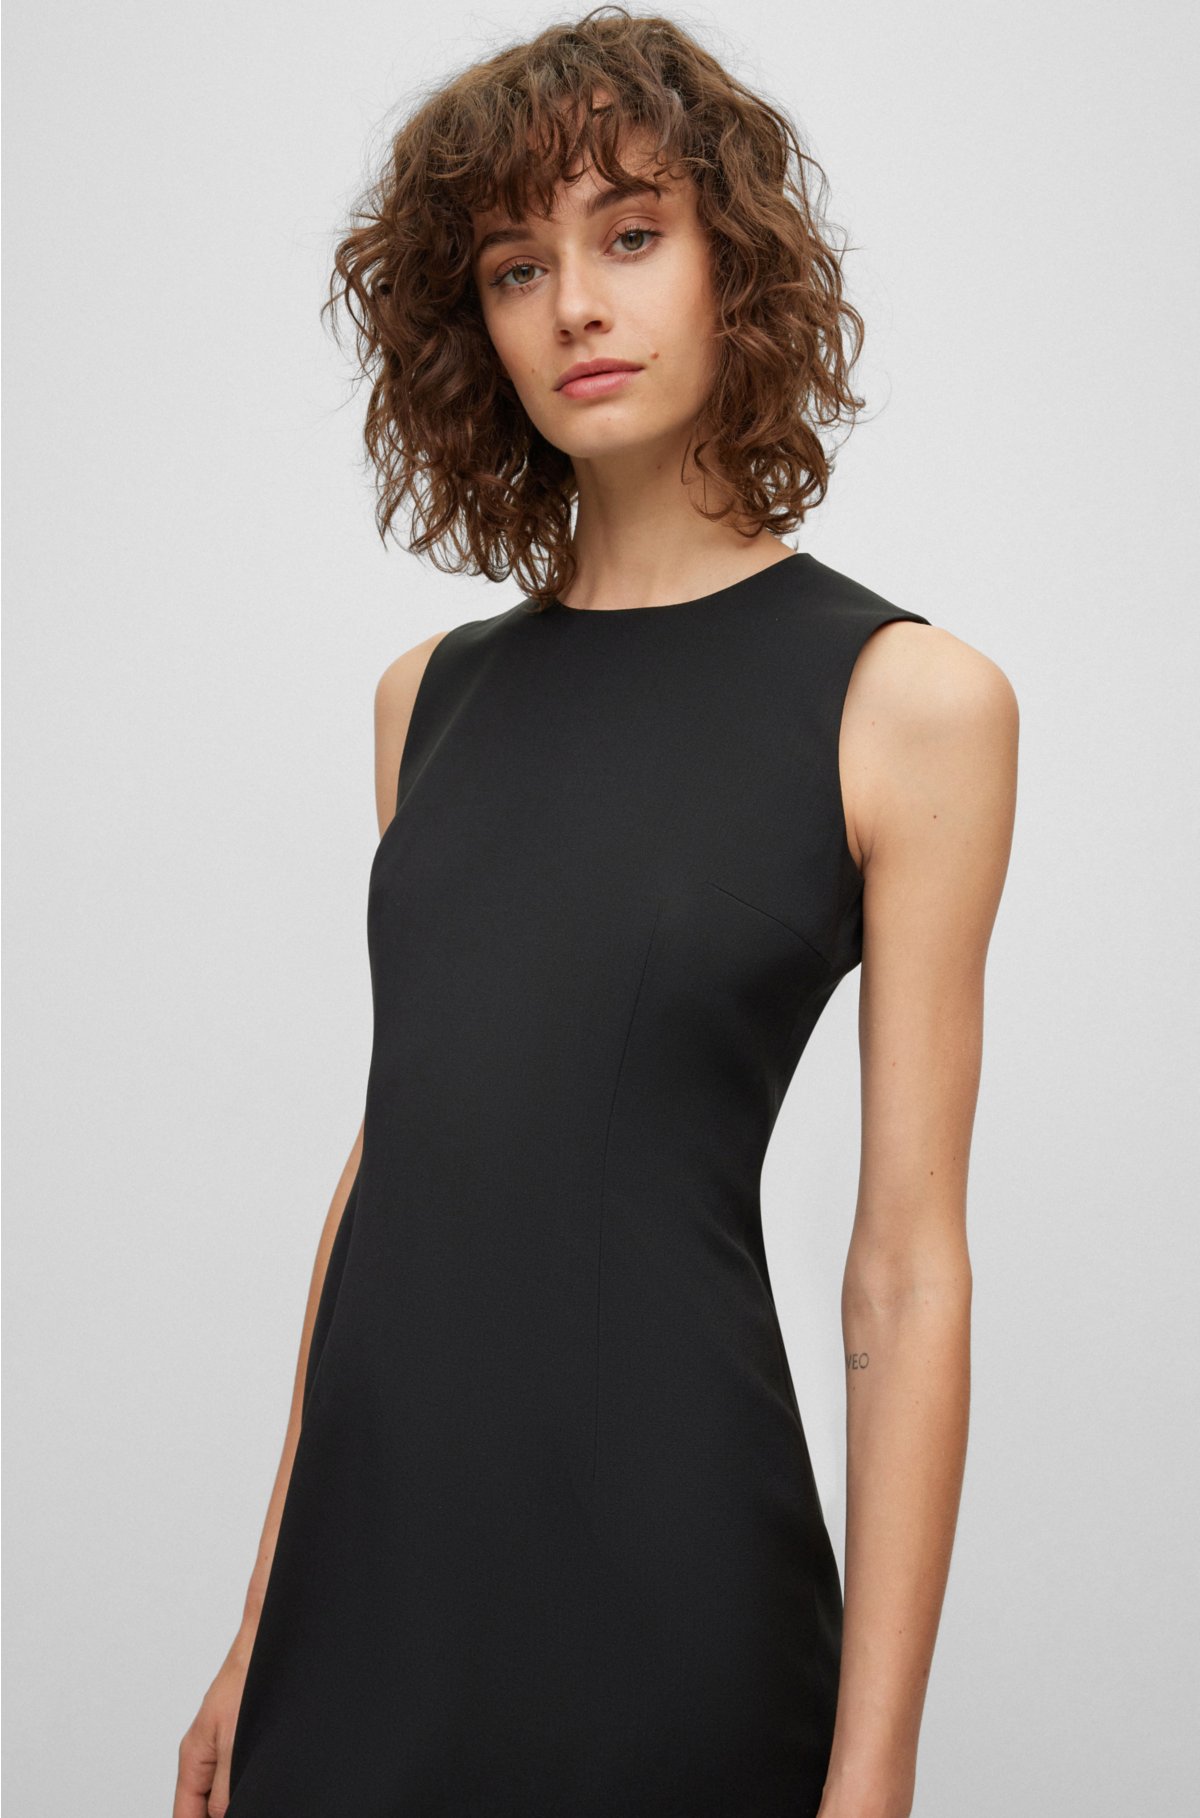 Shop Sleeveless Shift Dress with Polo Neck Online